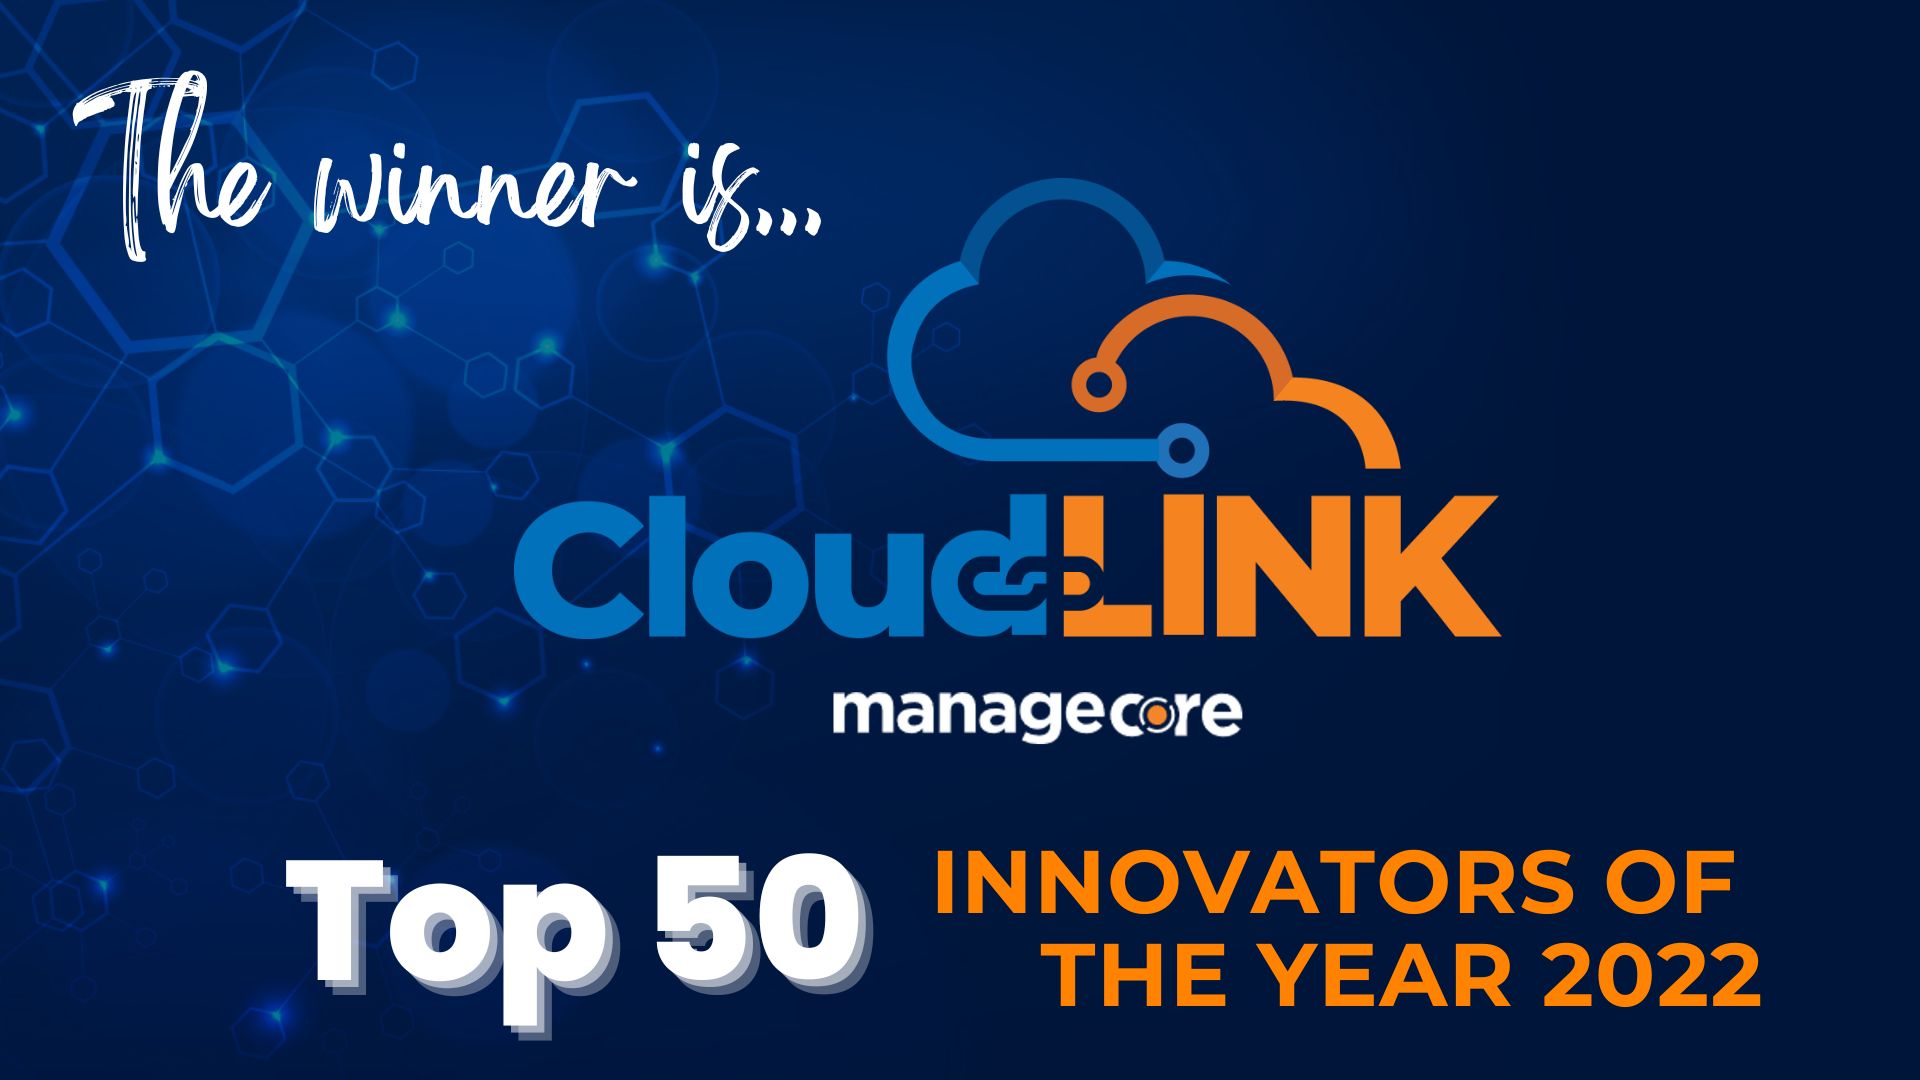 Managecore Cloud Migration Automation CloudLINK Named “Top 50 Innovators for 2022” from CIO Bulletin